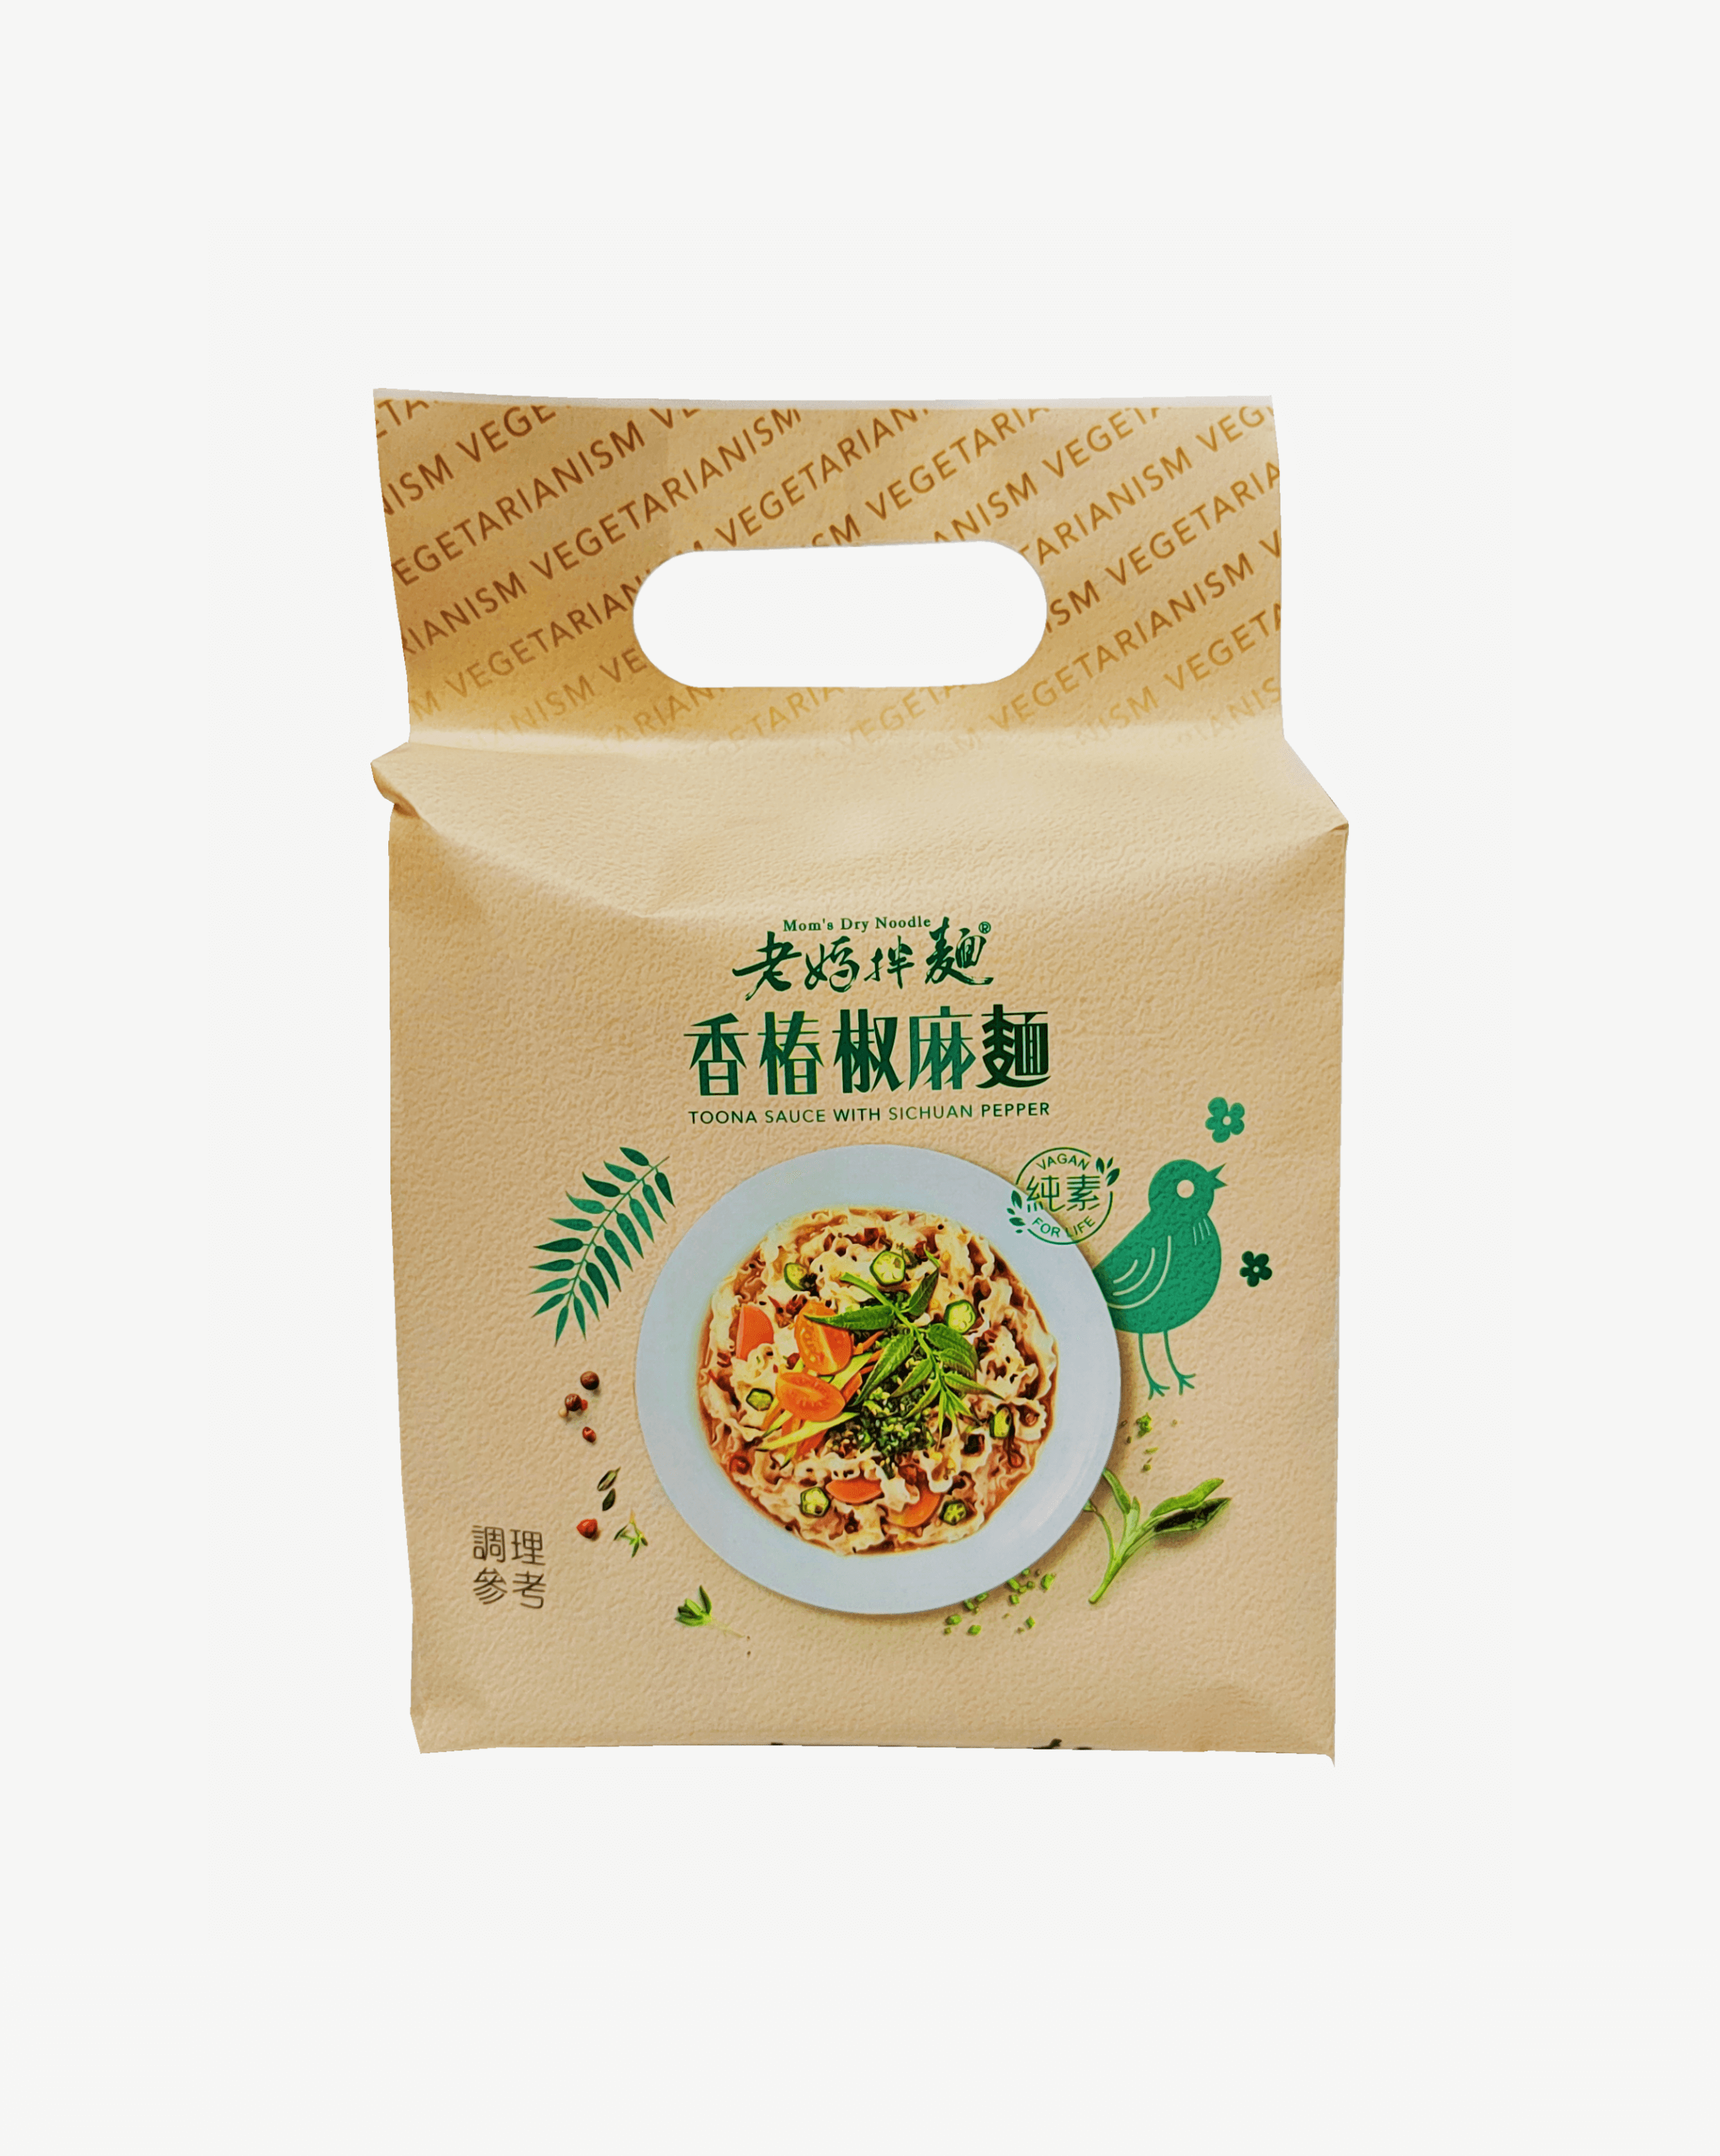 Noodles Toona Sauce With Sichuan Pepper 354g (118gx3pcs) Moms Taiwan